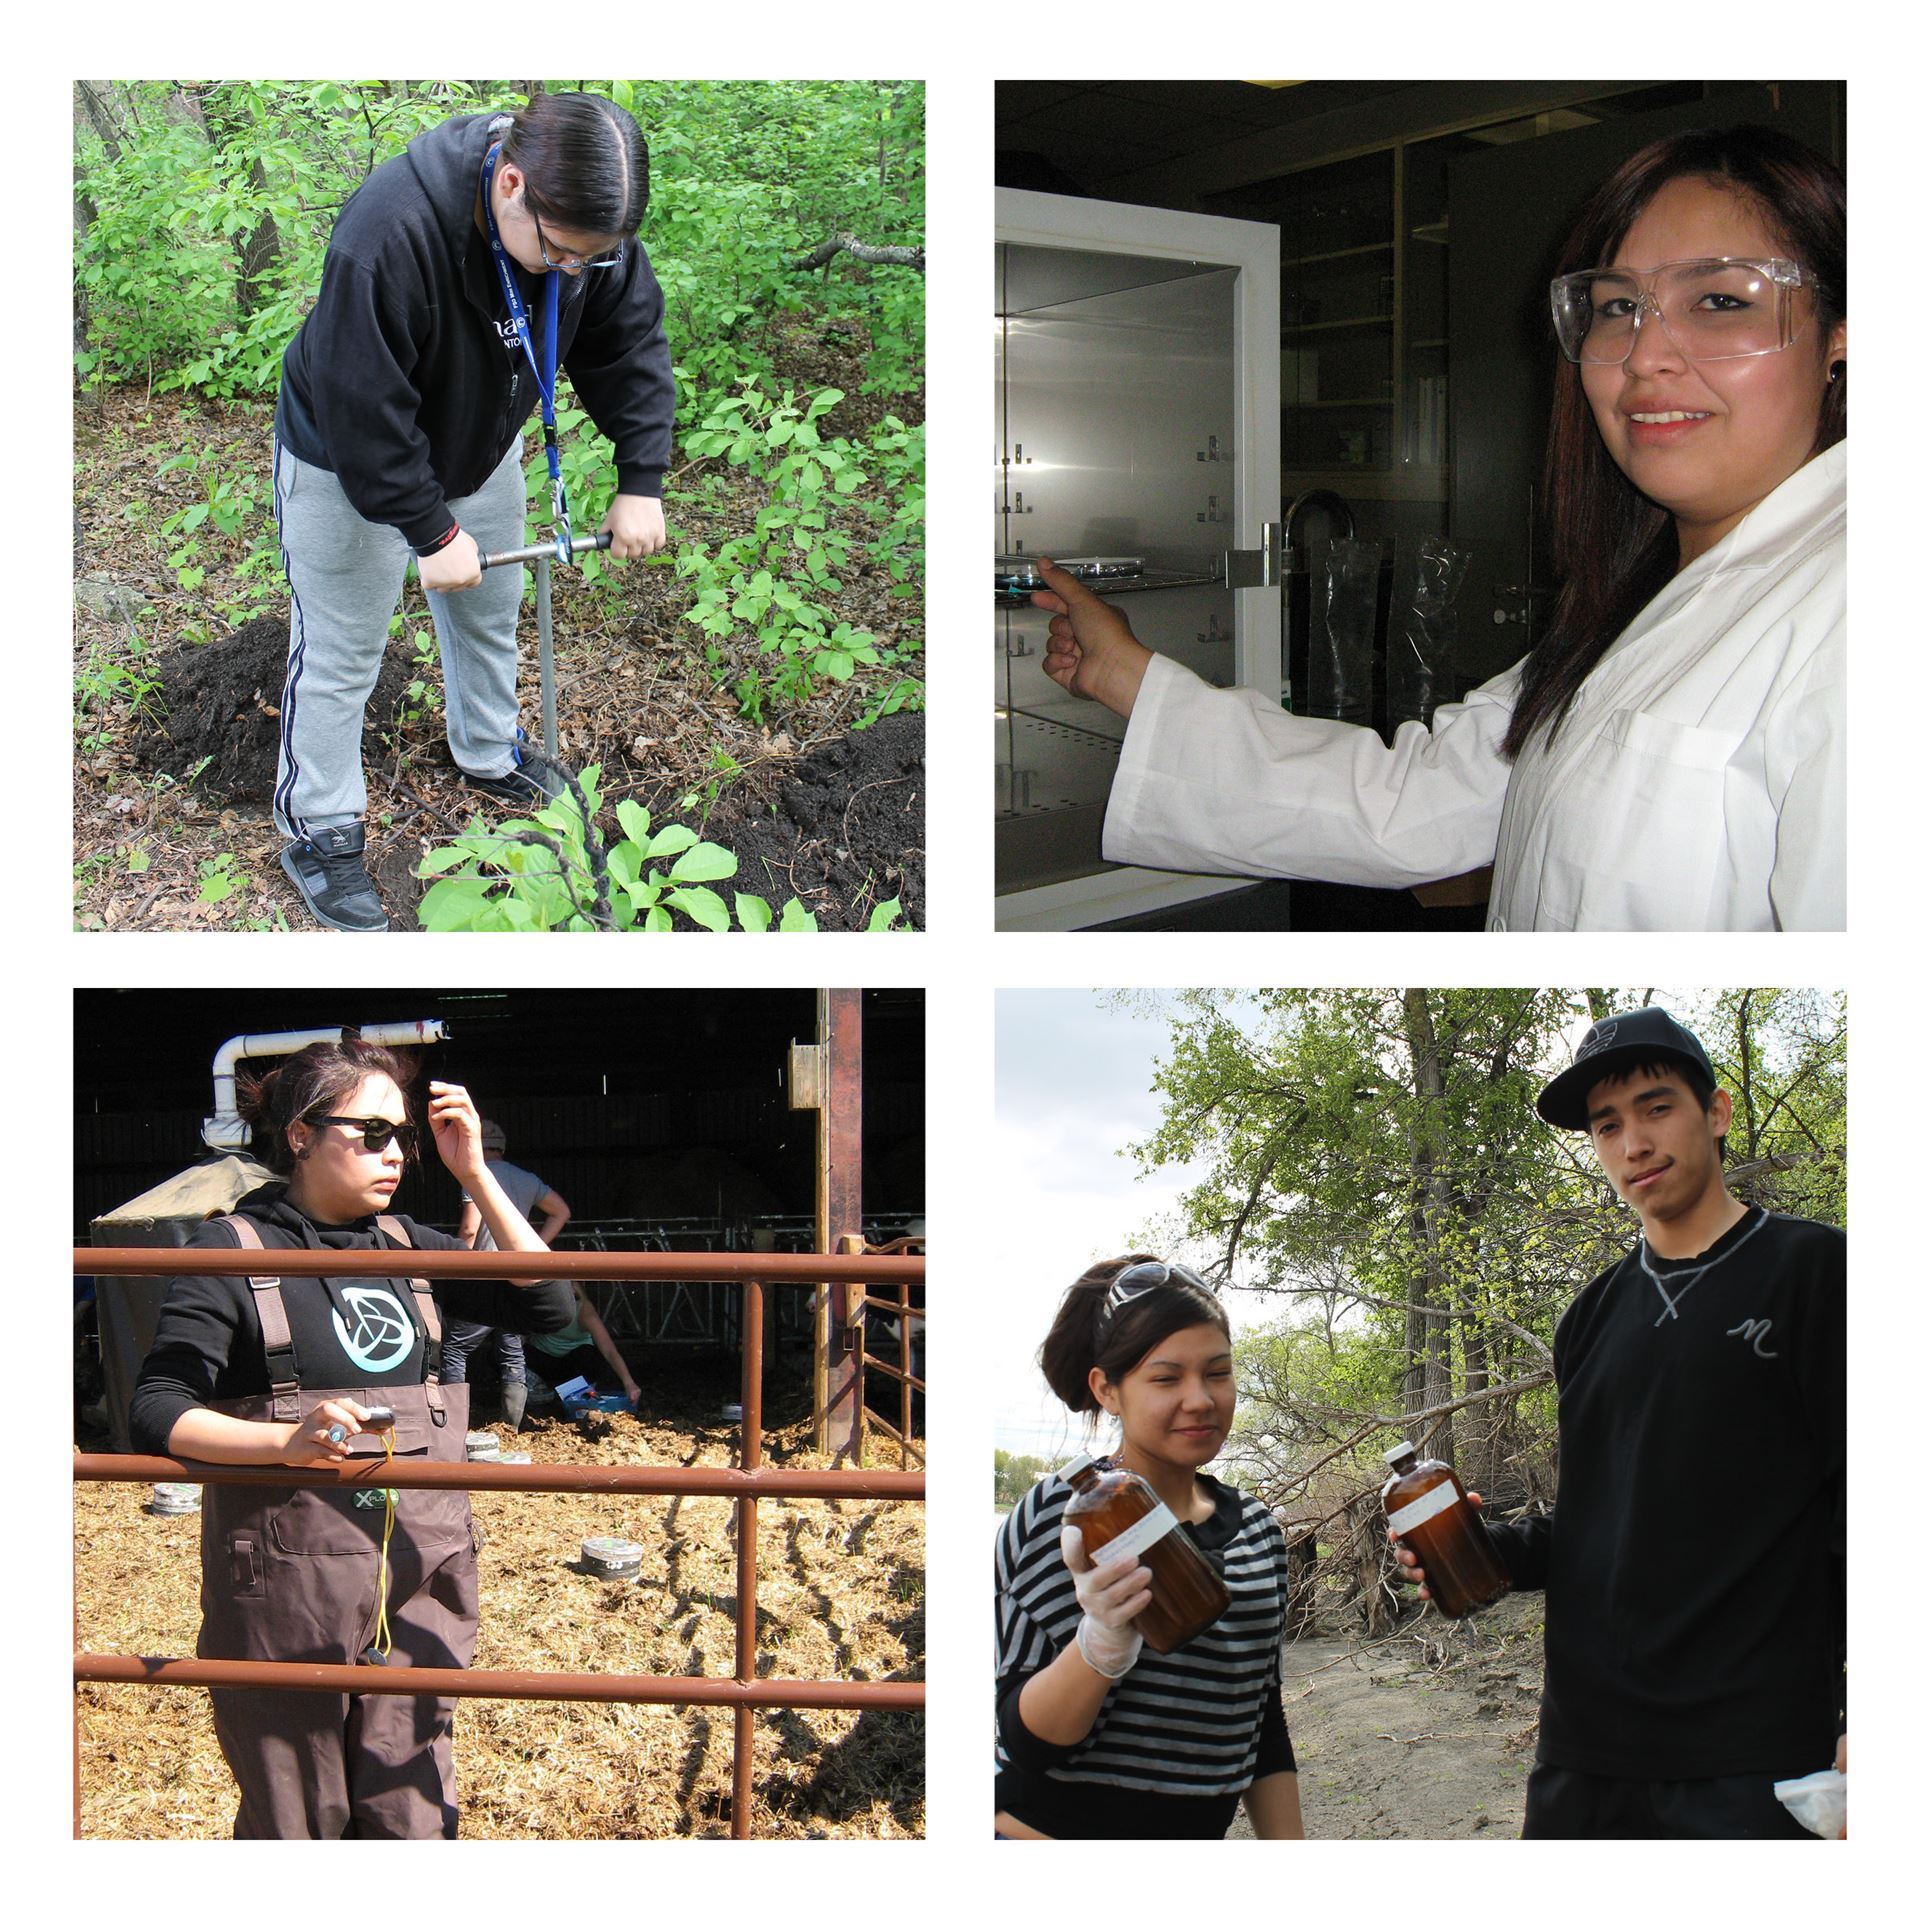 Four pictures of VJKF students. Top left picture of a student outside digging up plant. Top right picture of a student in a lab coat and goggles. Bottom left picture of a student outside inside an animal pen. Bottom right picture of two students holding water samples.